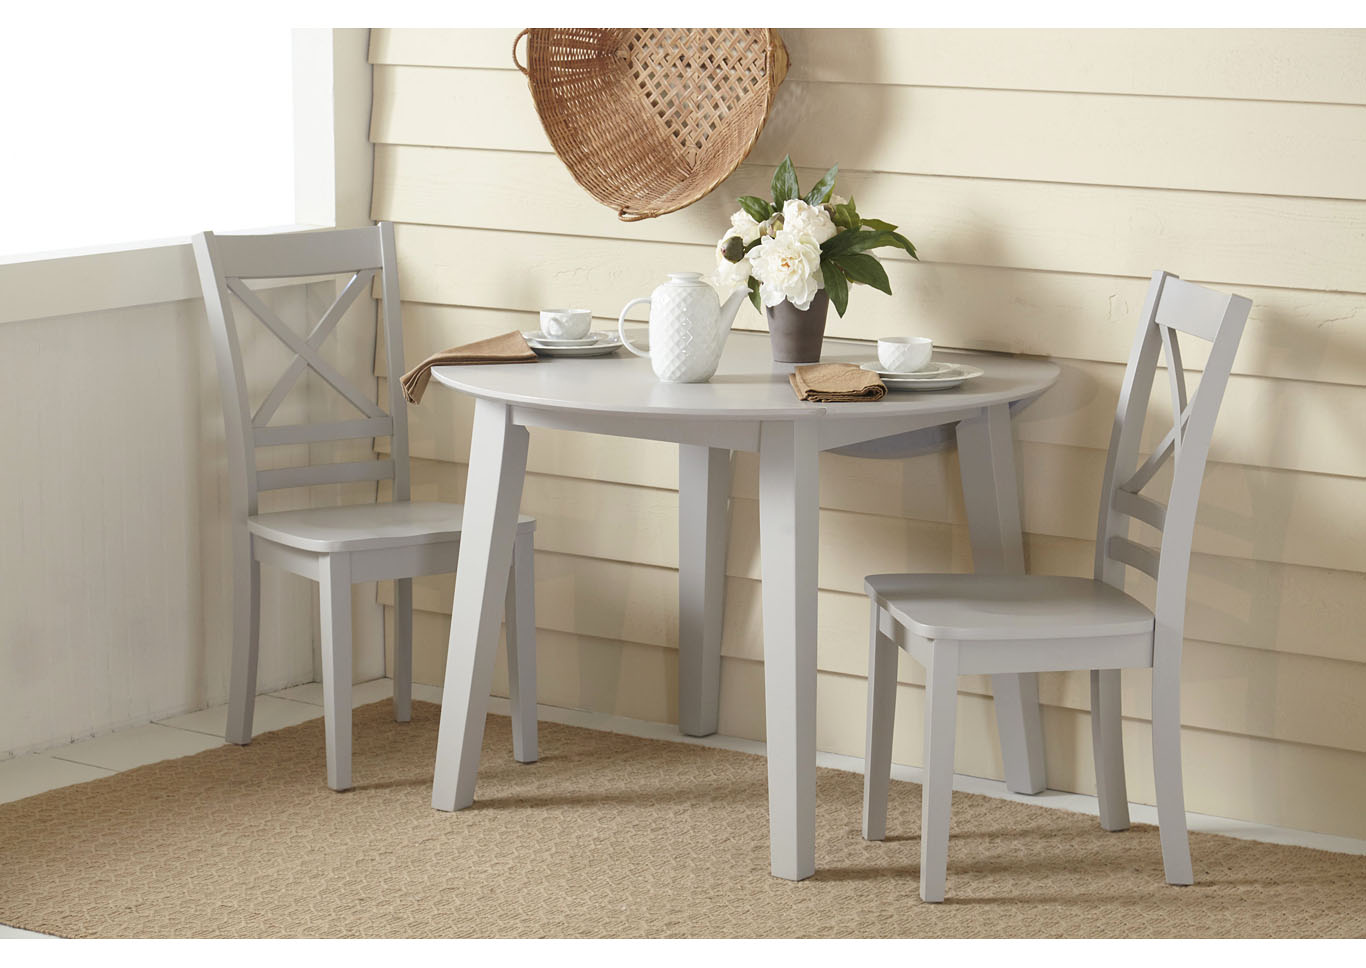 Simply Drop Leaf Table with 2 Chairs - Gray,Instore